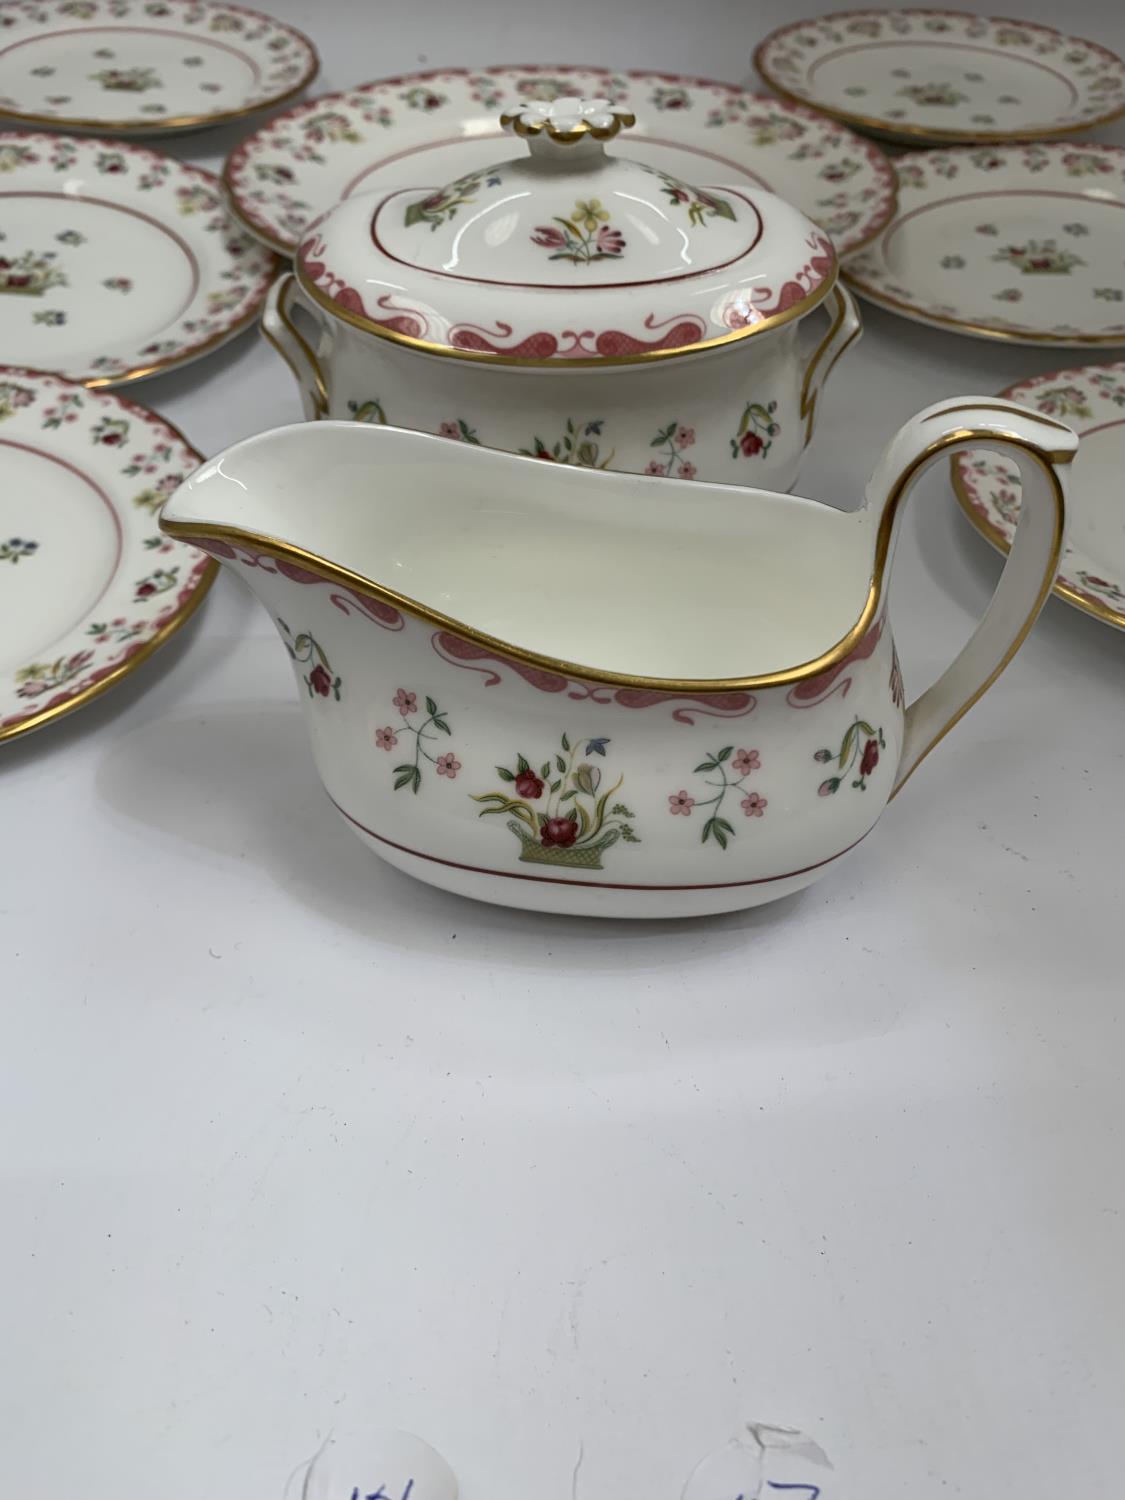 A QUANTITY OF WEDGWOOD 'BIANCA' TO INCLUDE A CAKE PLATE, SIDE PLATES, CREAM JUG AND SUGAR BOWL - Image 2 of 6